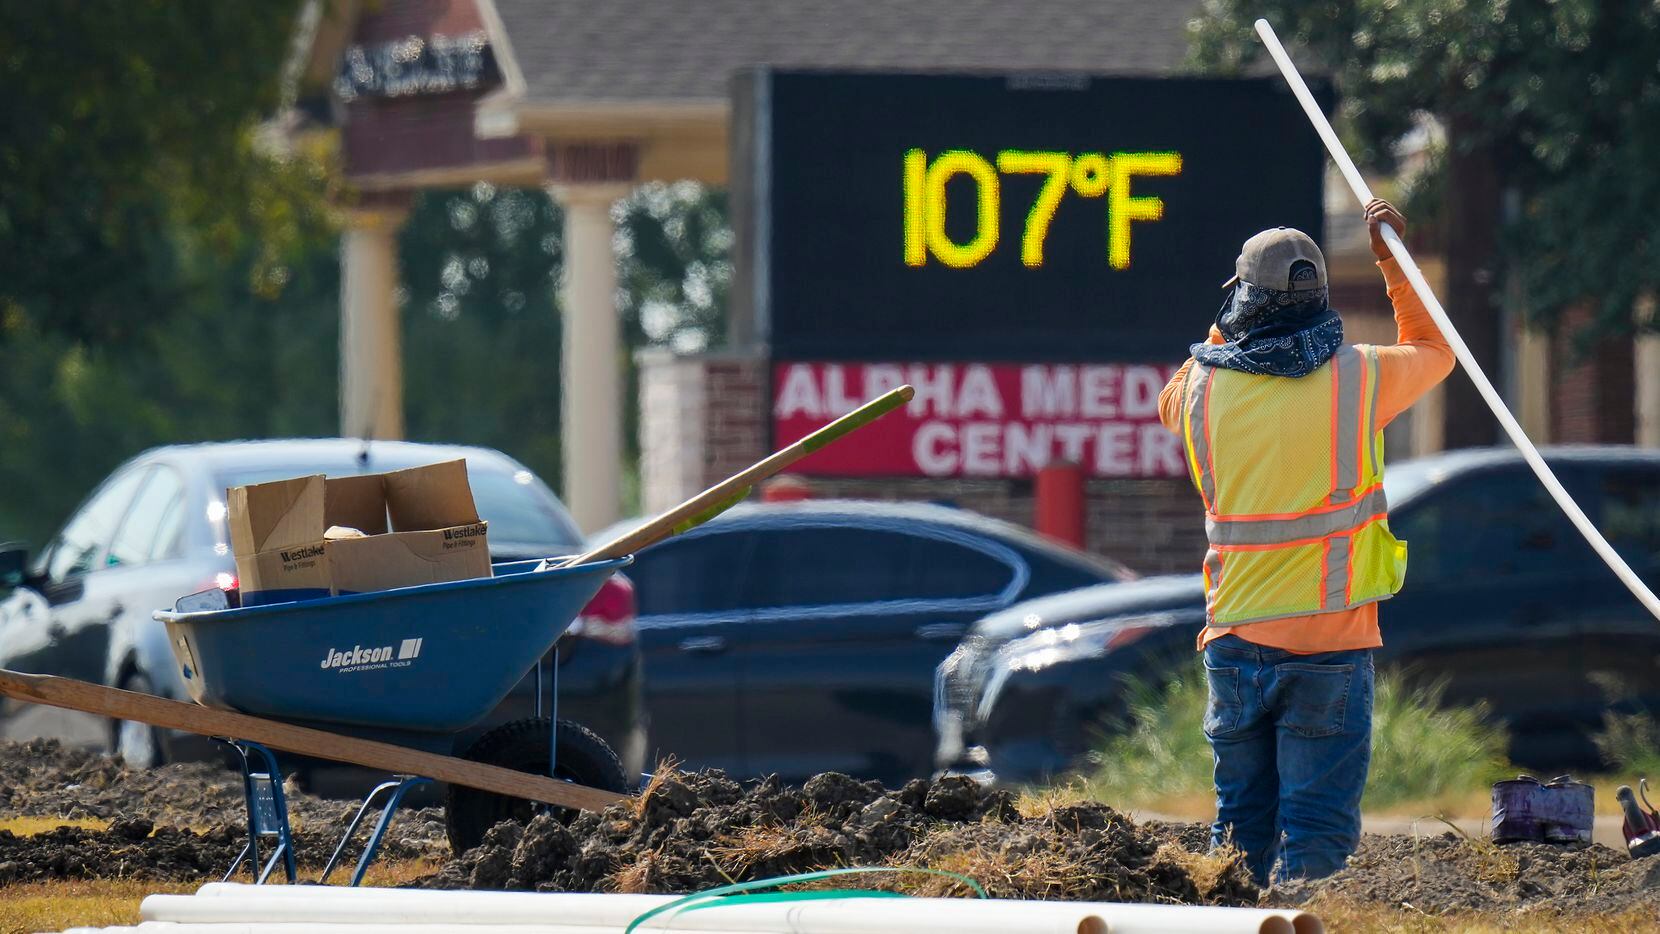 The sign on a business reads 107° as Diego Cardenas works on a construction project in the...